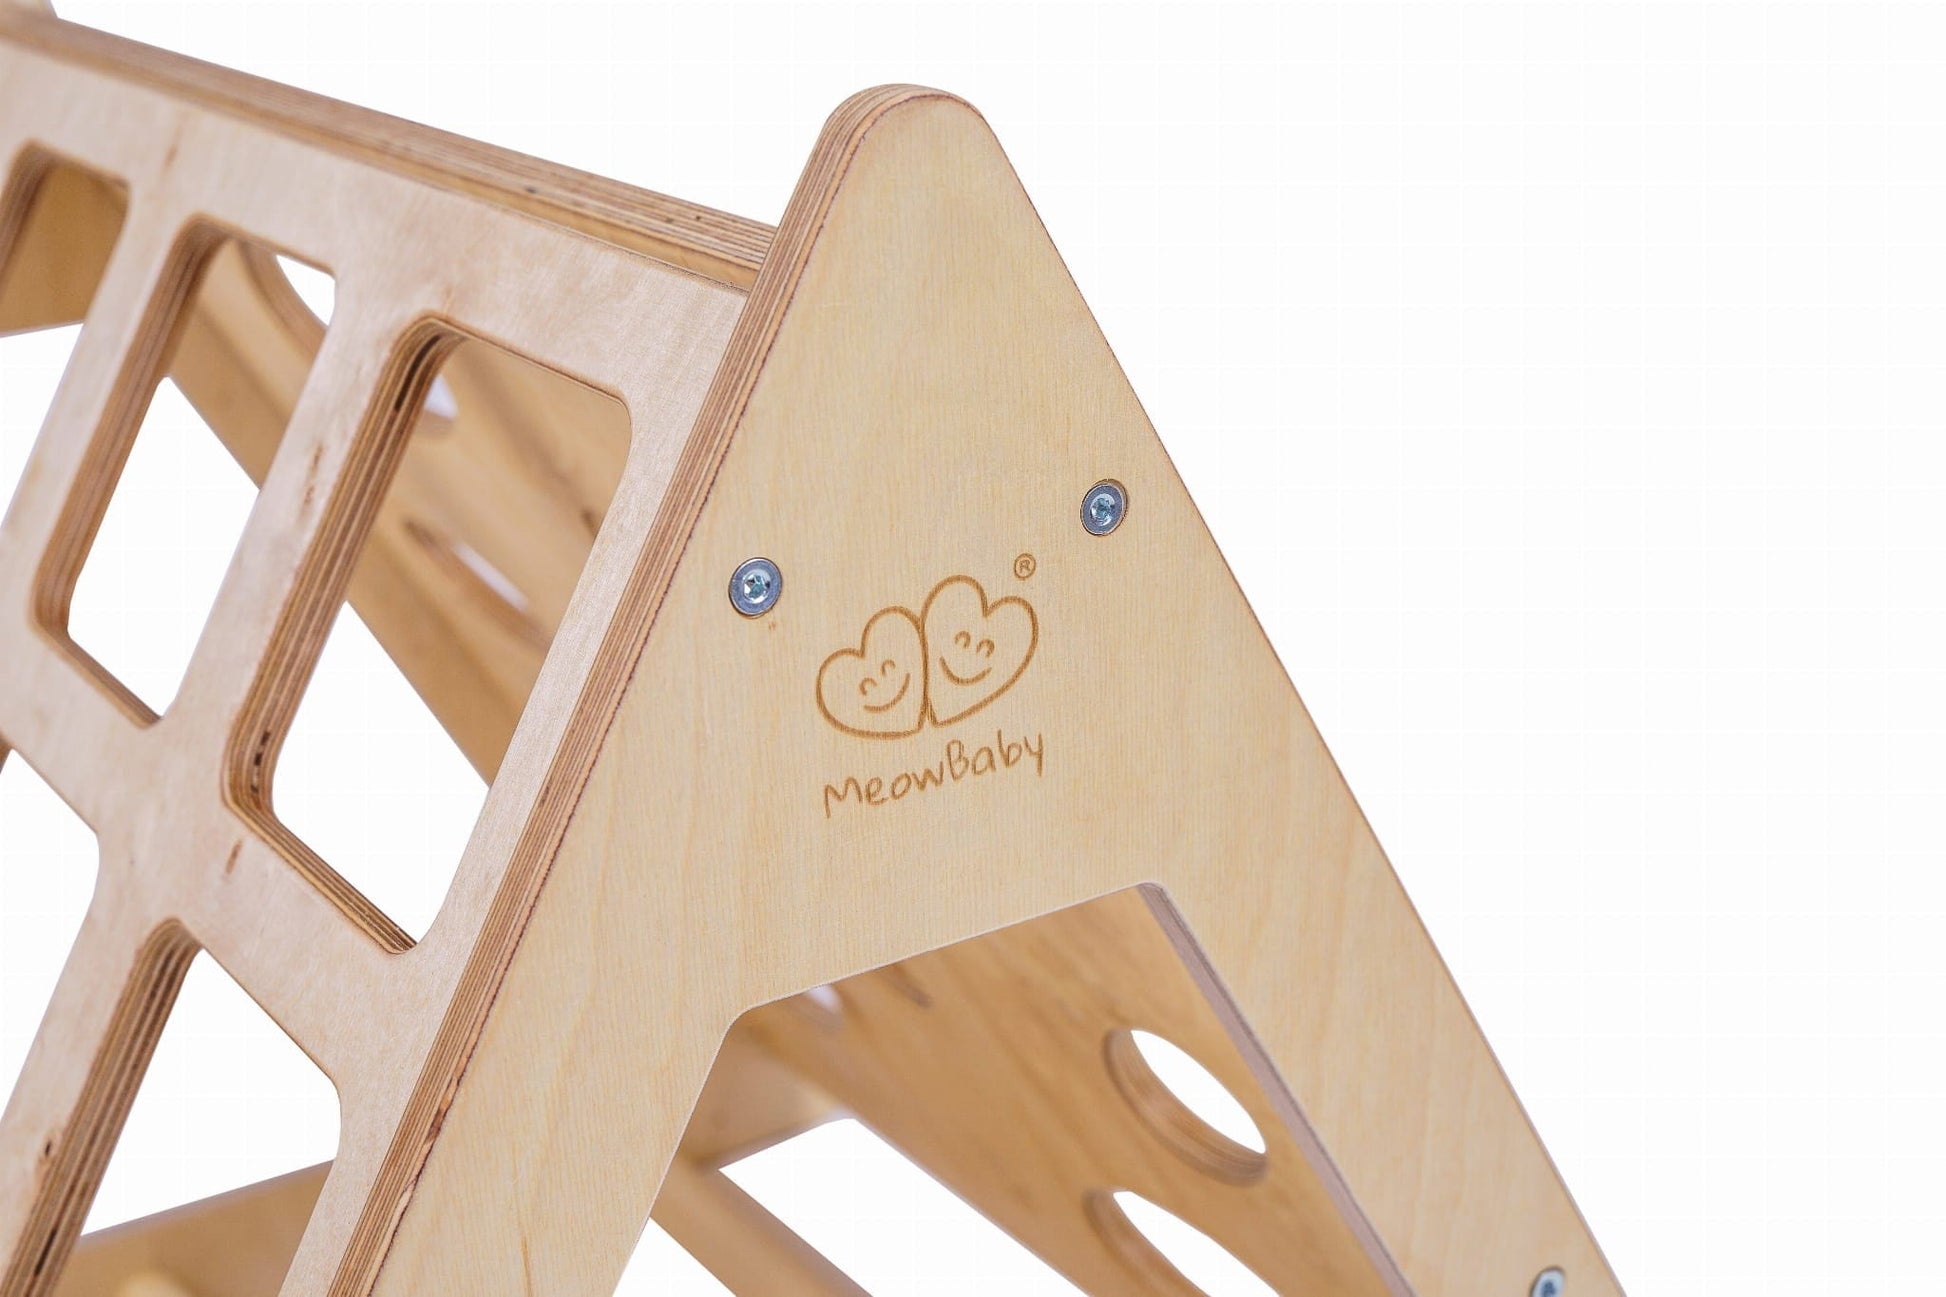 Wooden Climbing Shapes Triangle For Kids By MeowBaby - Stylemykid.com